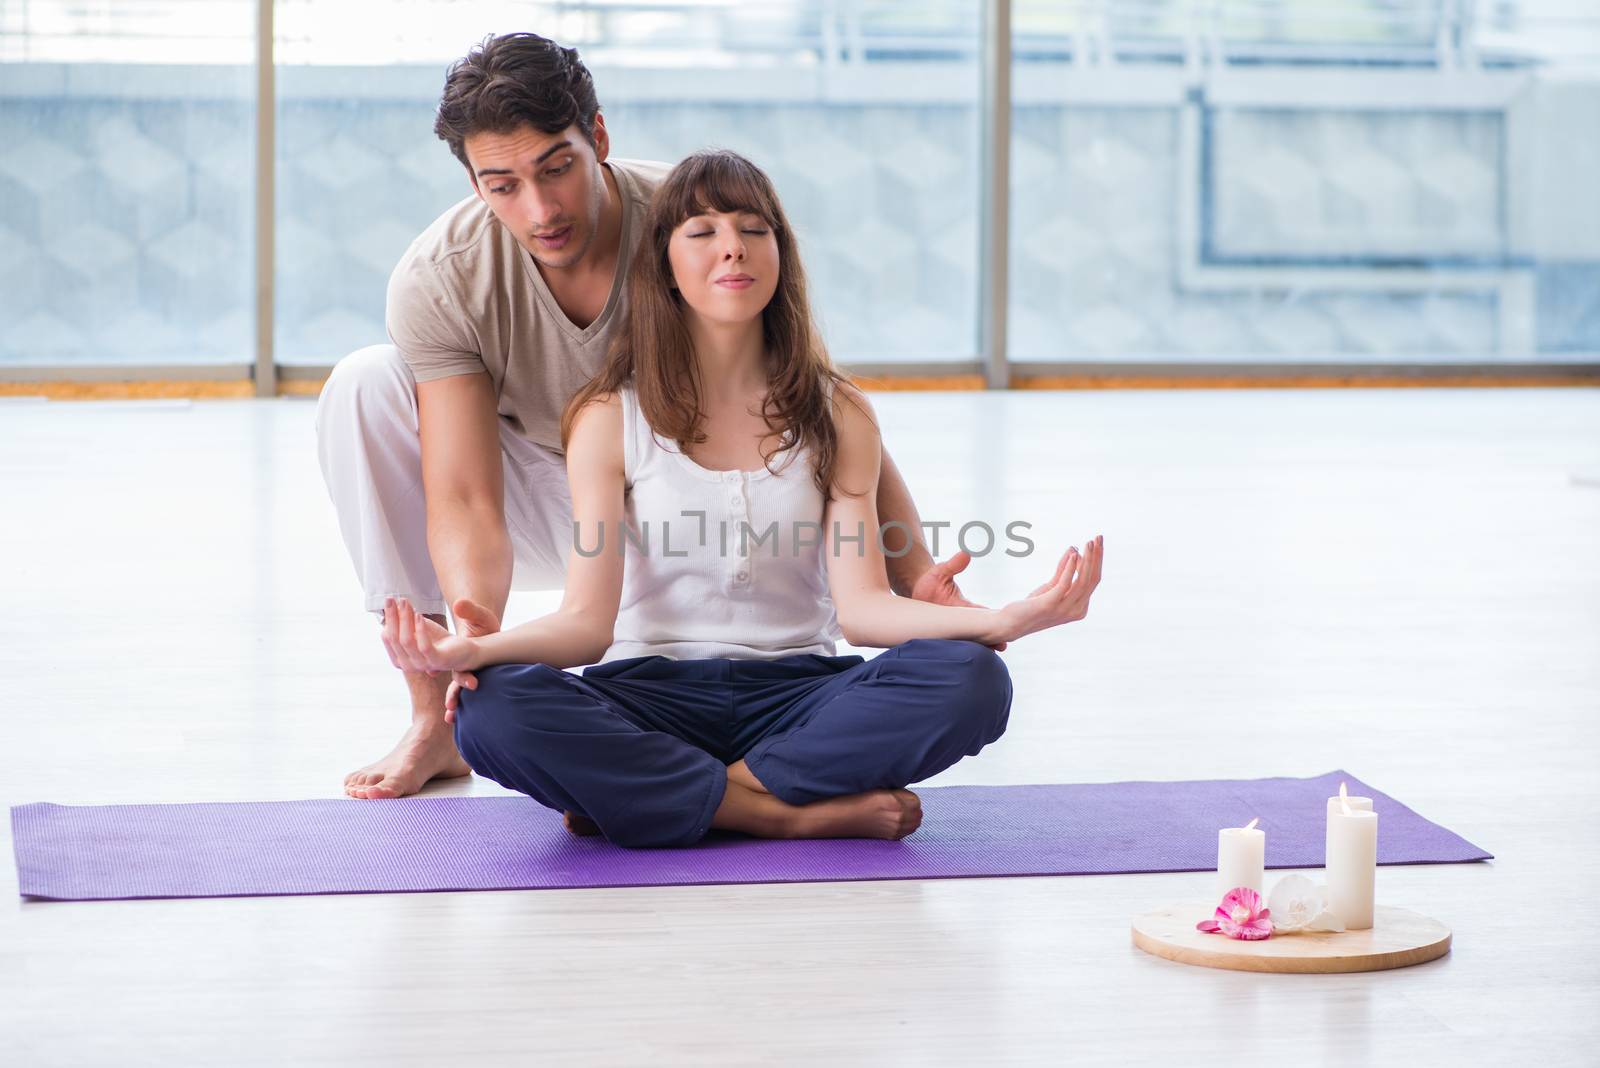 Personal coach helping during yoga session by Elnur